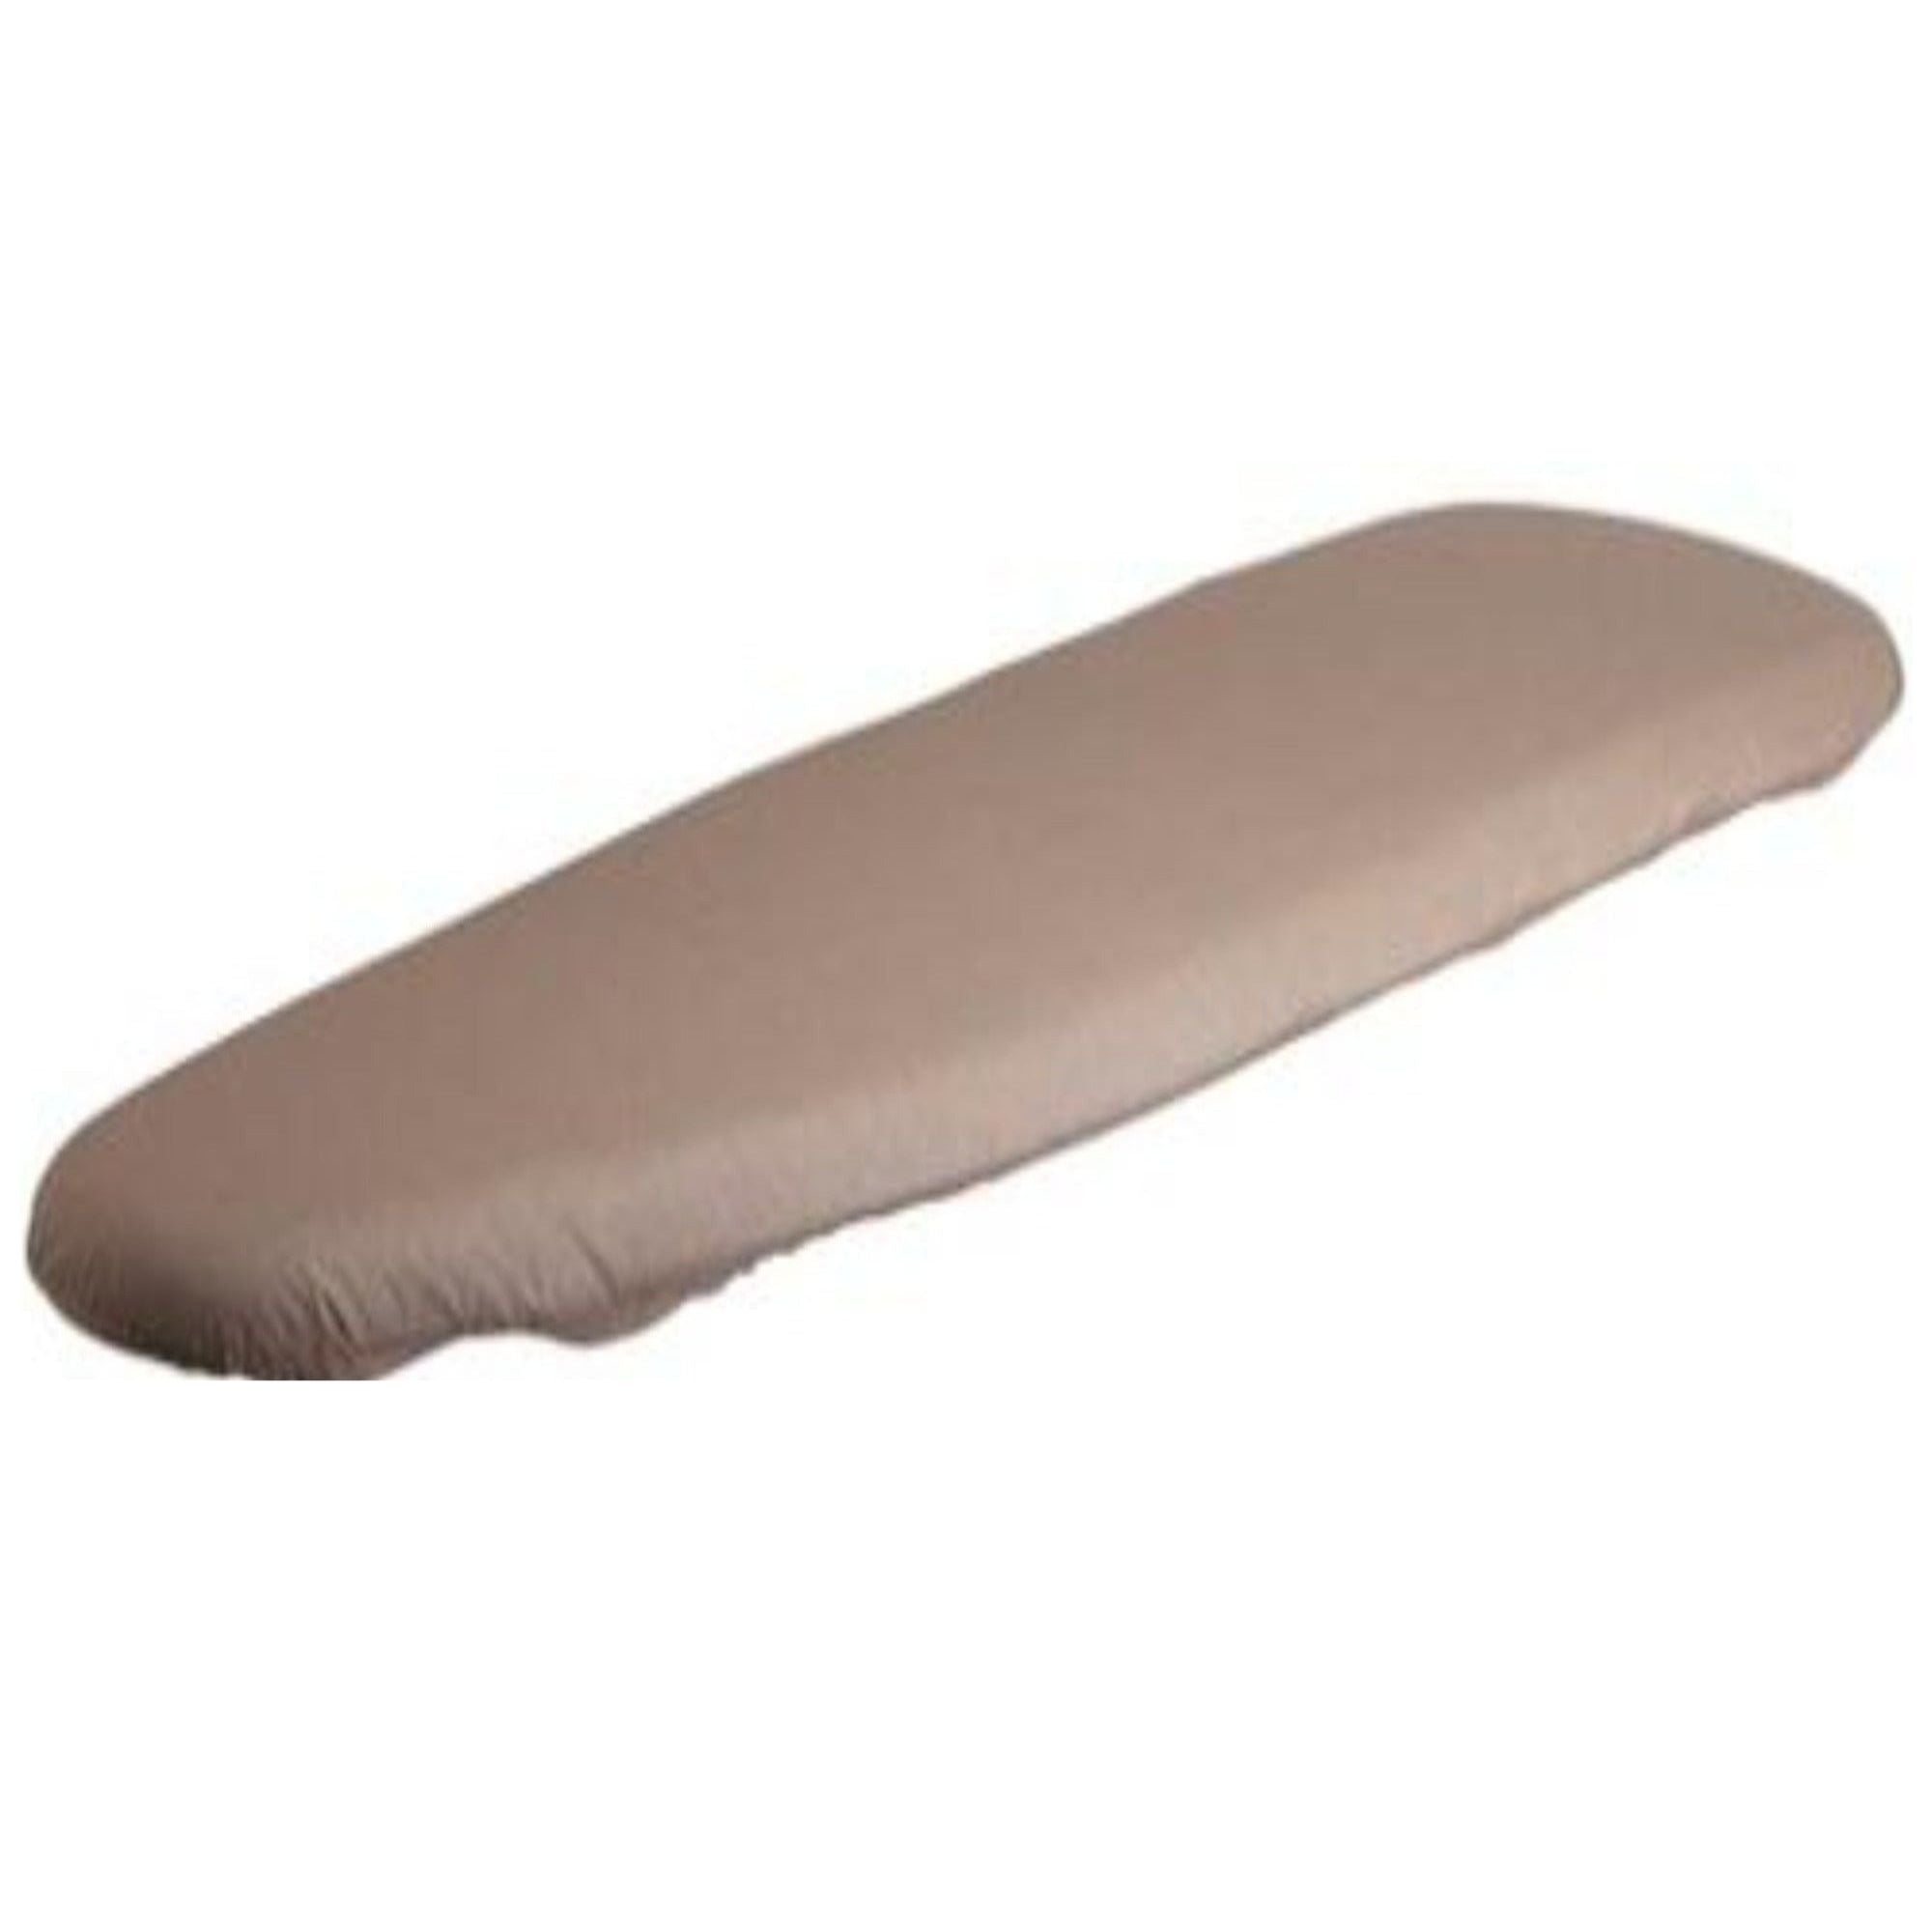 Pressto Valet Ironing Board Cover/Pad ~ Brown